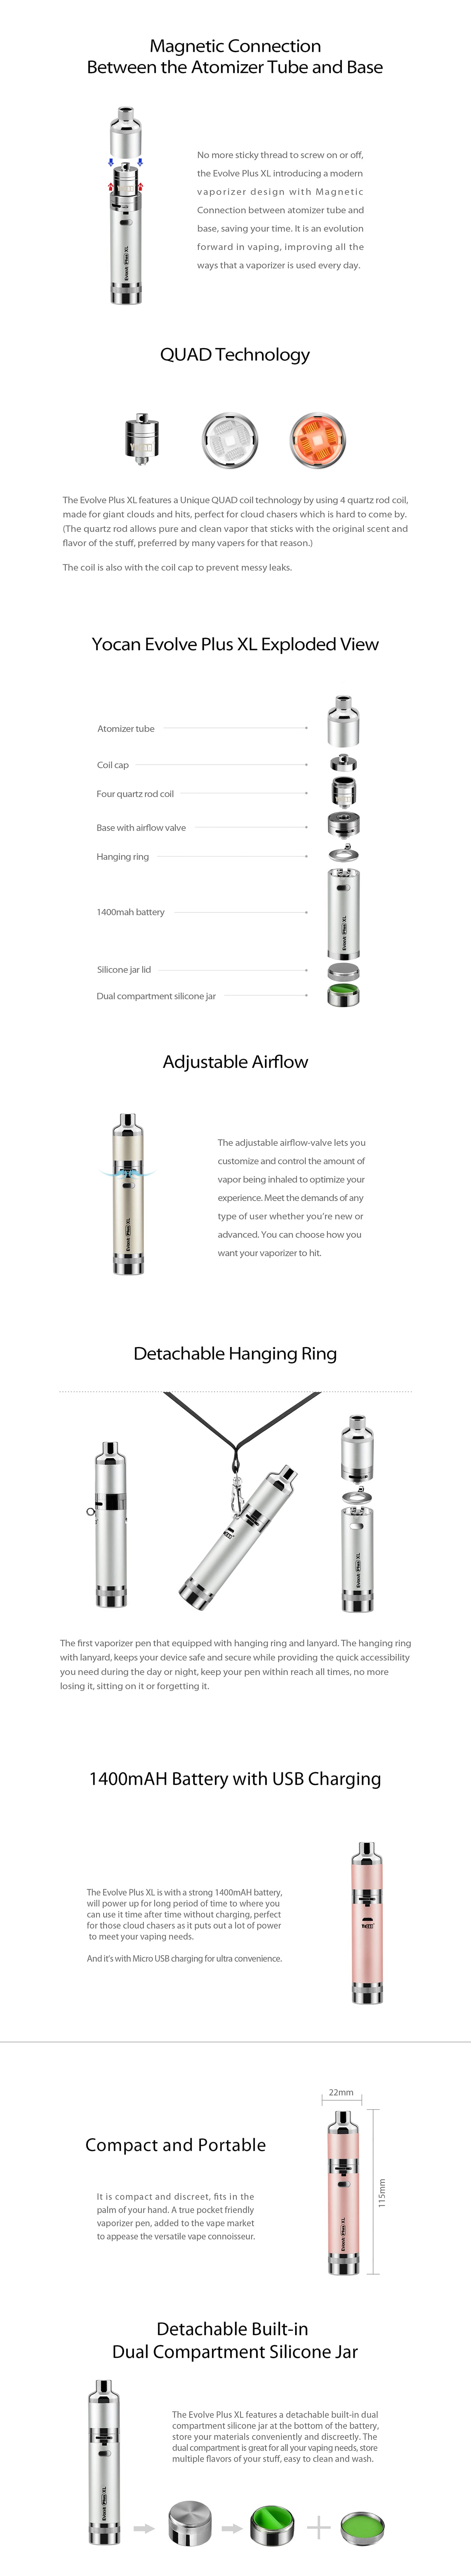 Yocan Evolve Plus XL Product Page inline ad